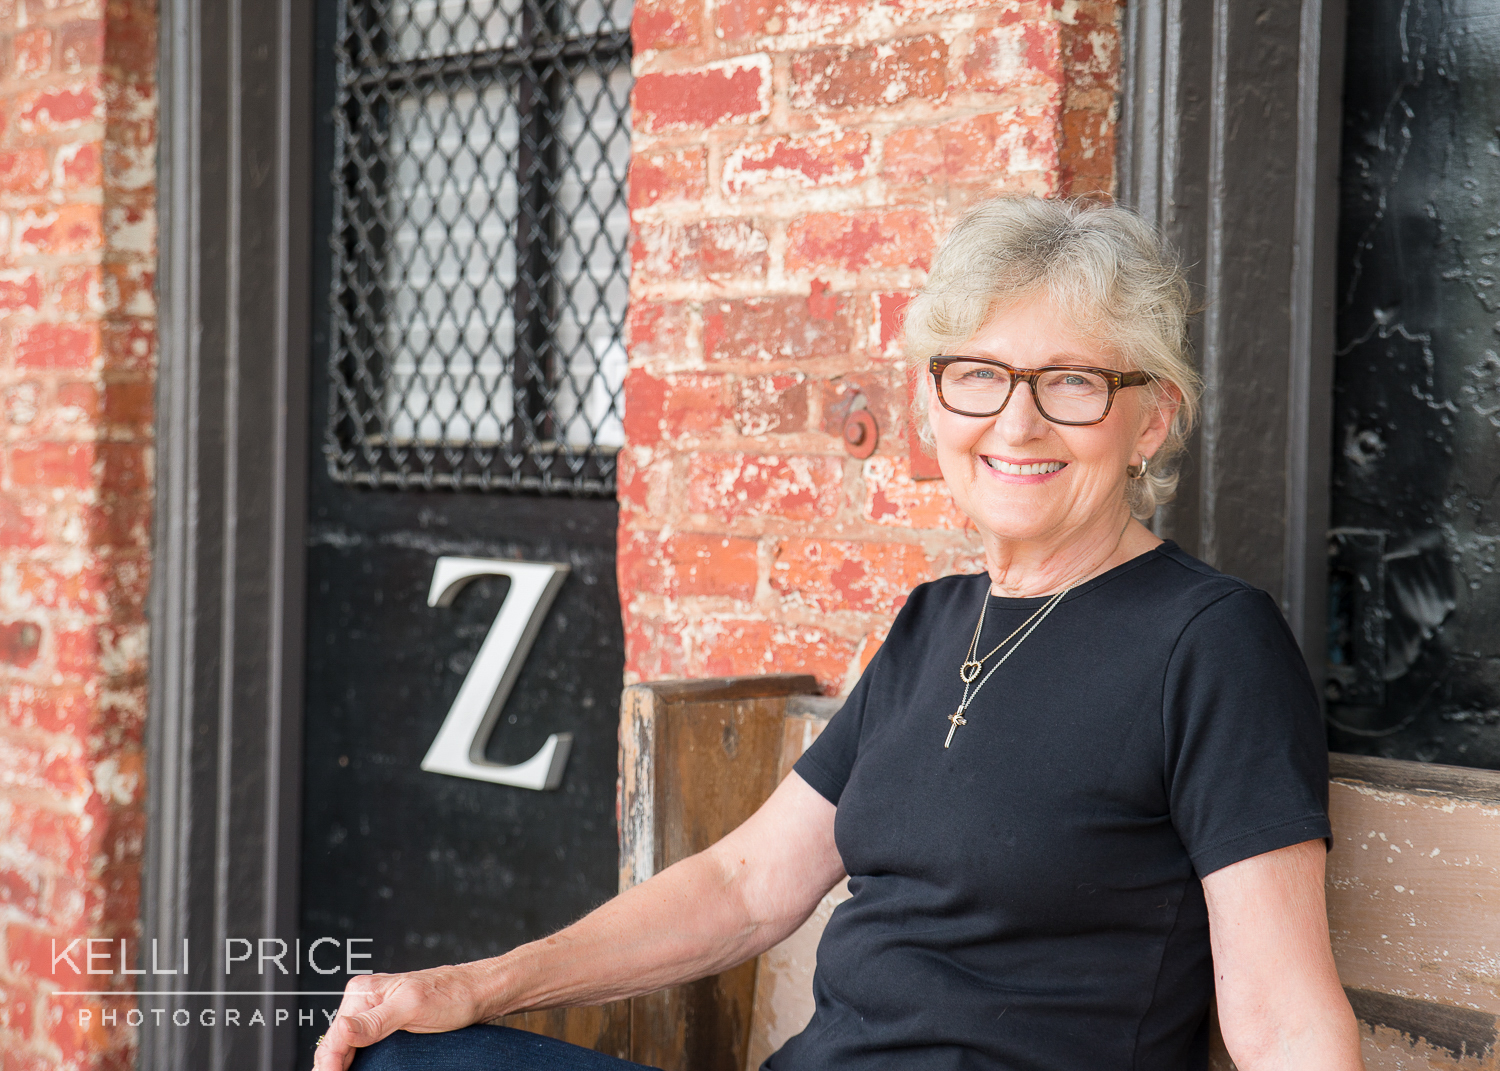 Cathy outside her studio, Studio Z. Click on the image to learn more about Cathy.